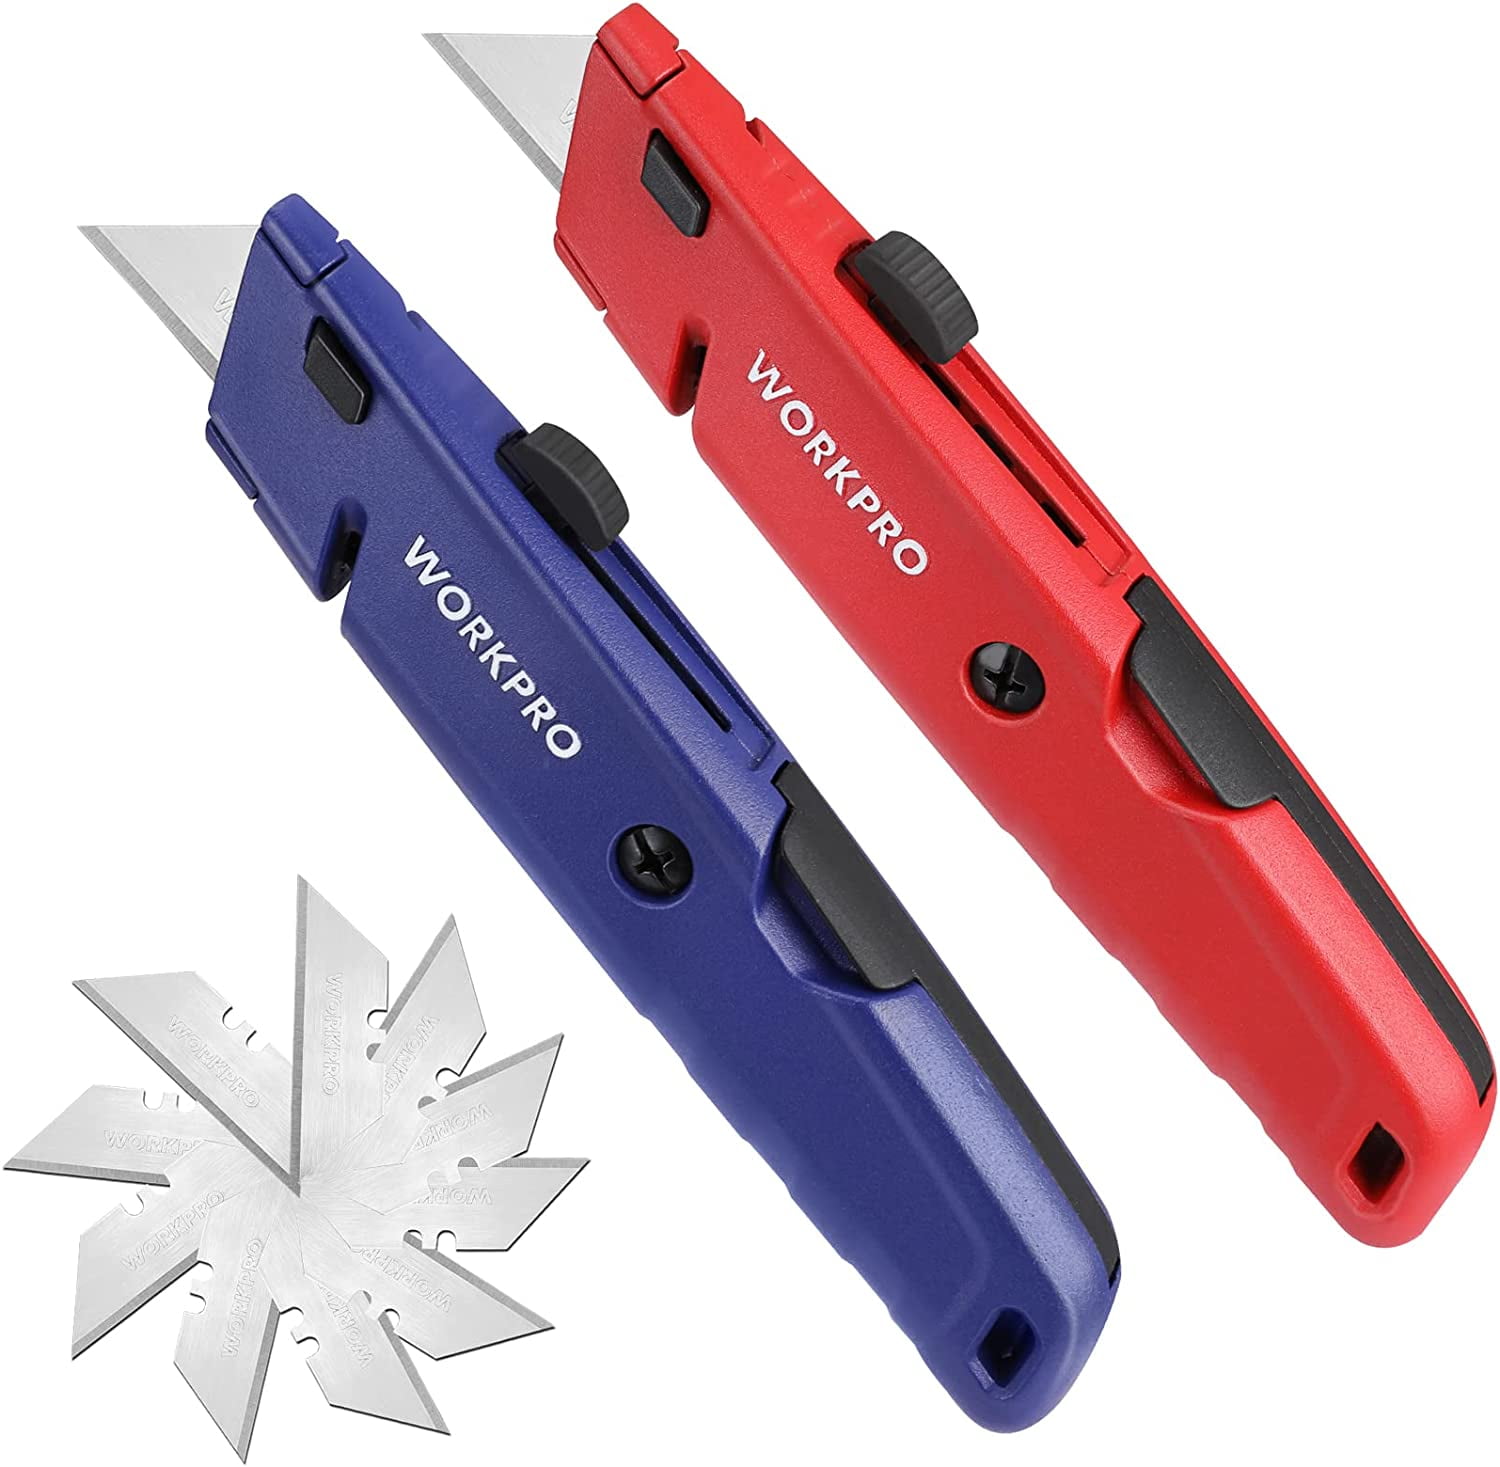 WorkPro Premium Utility Knife, 1pc Retractable All Metal Heavy Duty Box Cutter, Quick Change Blade Razor Knife, with 10 Extra Blades, Red